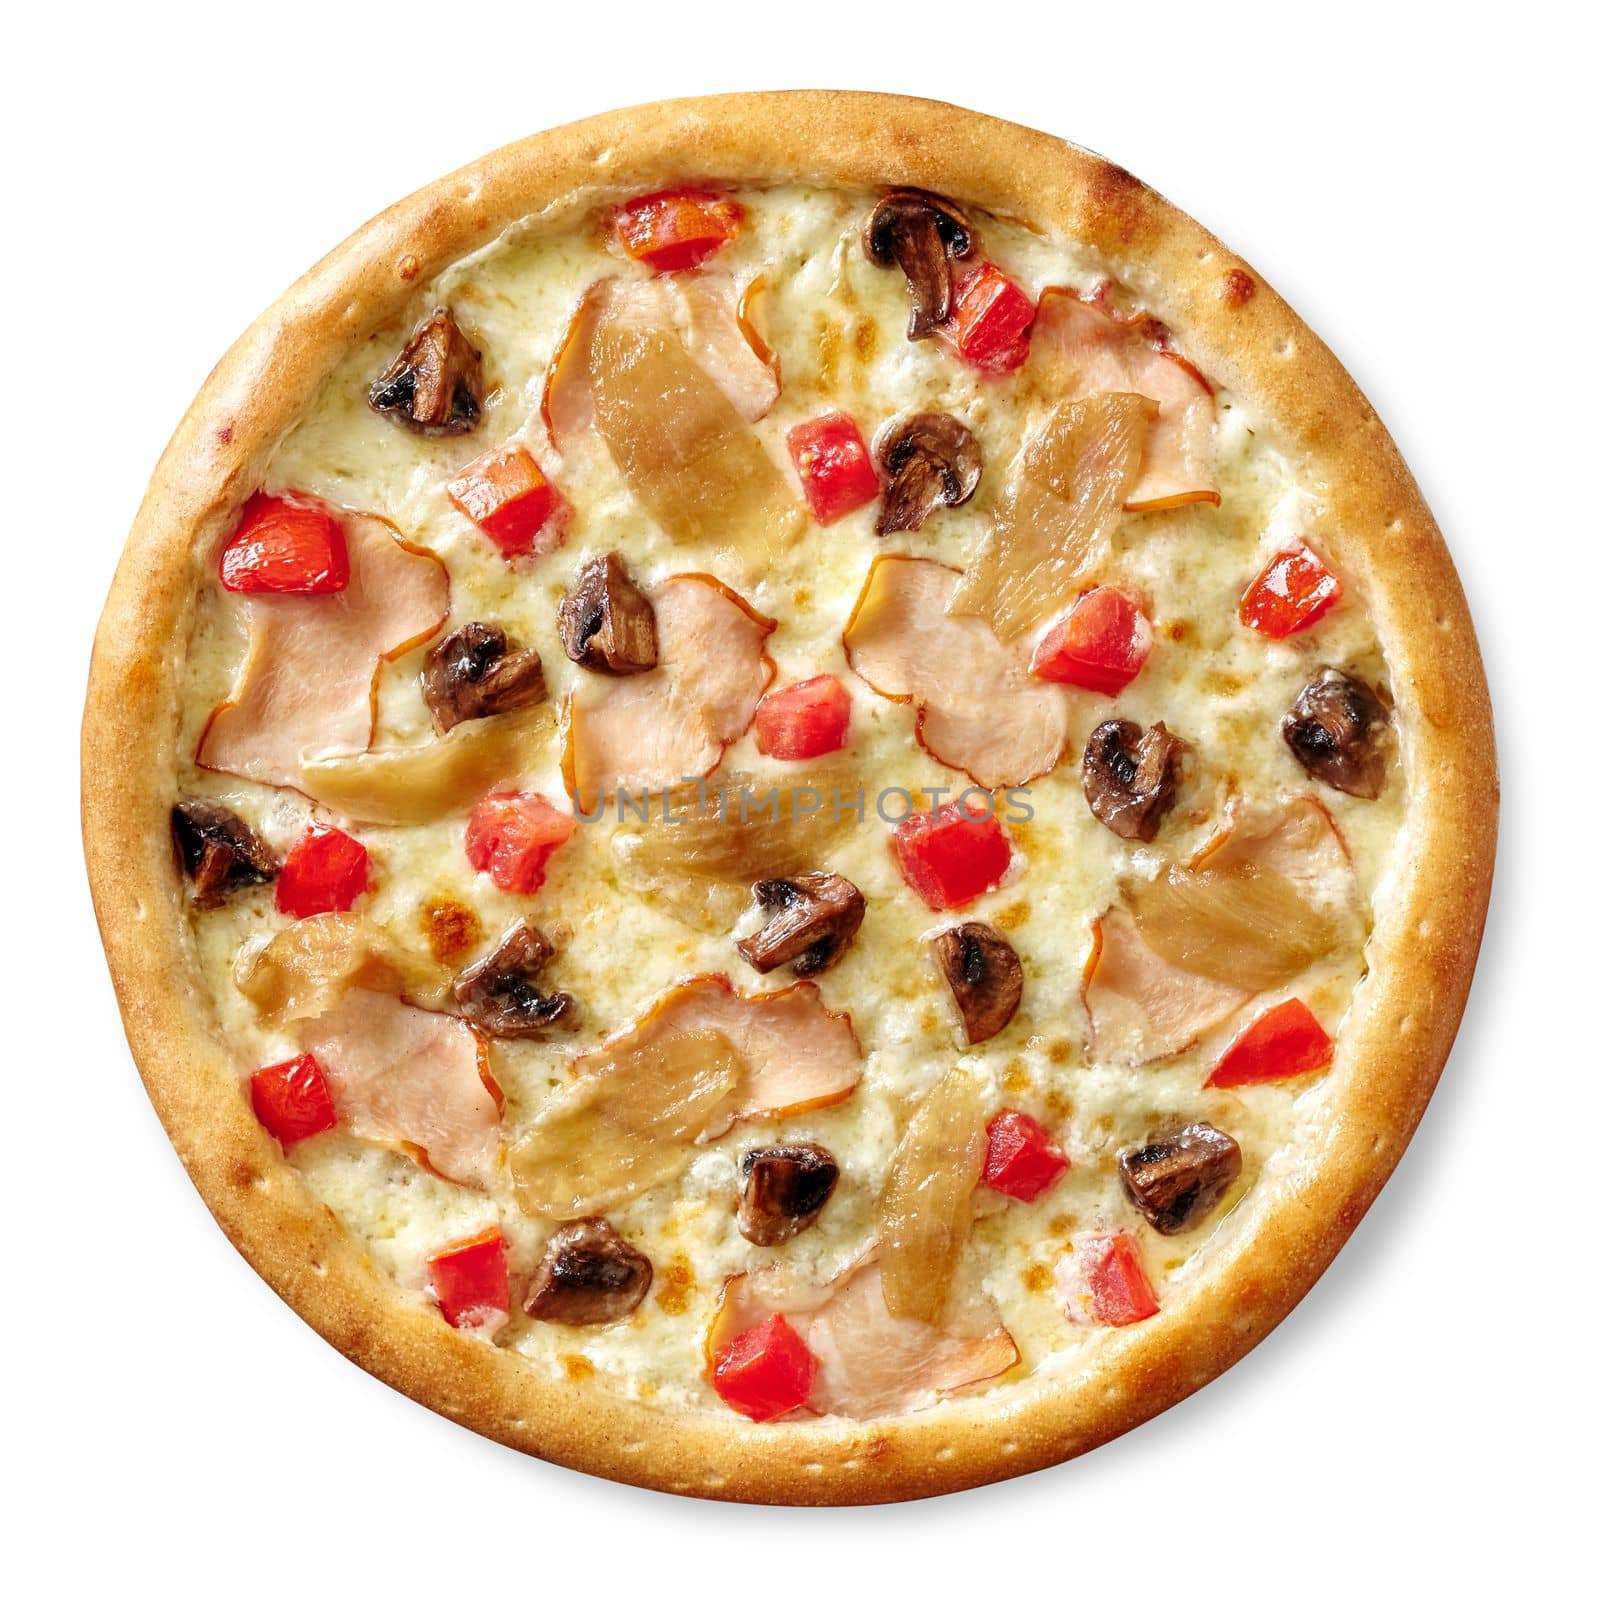 Delicious whole pizza with slices of smoked chicken fillet, fried mushrooms, caramelized onions and fresh ripe tomatoes on layer of melted cheese isolated on white background